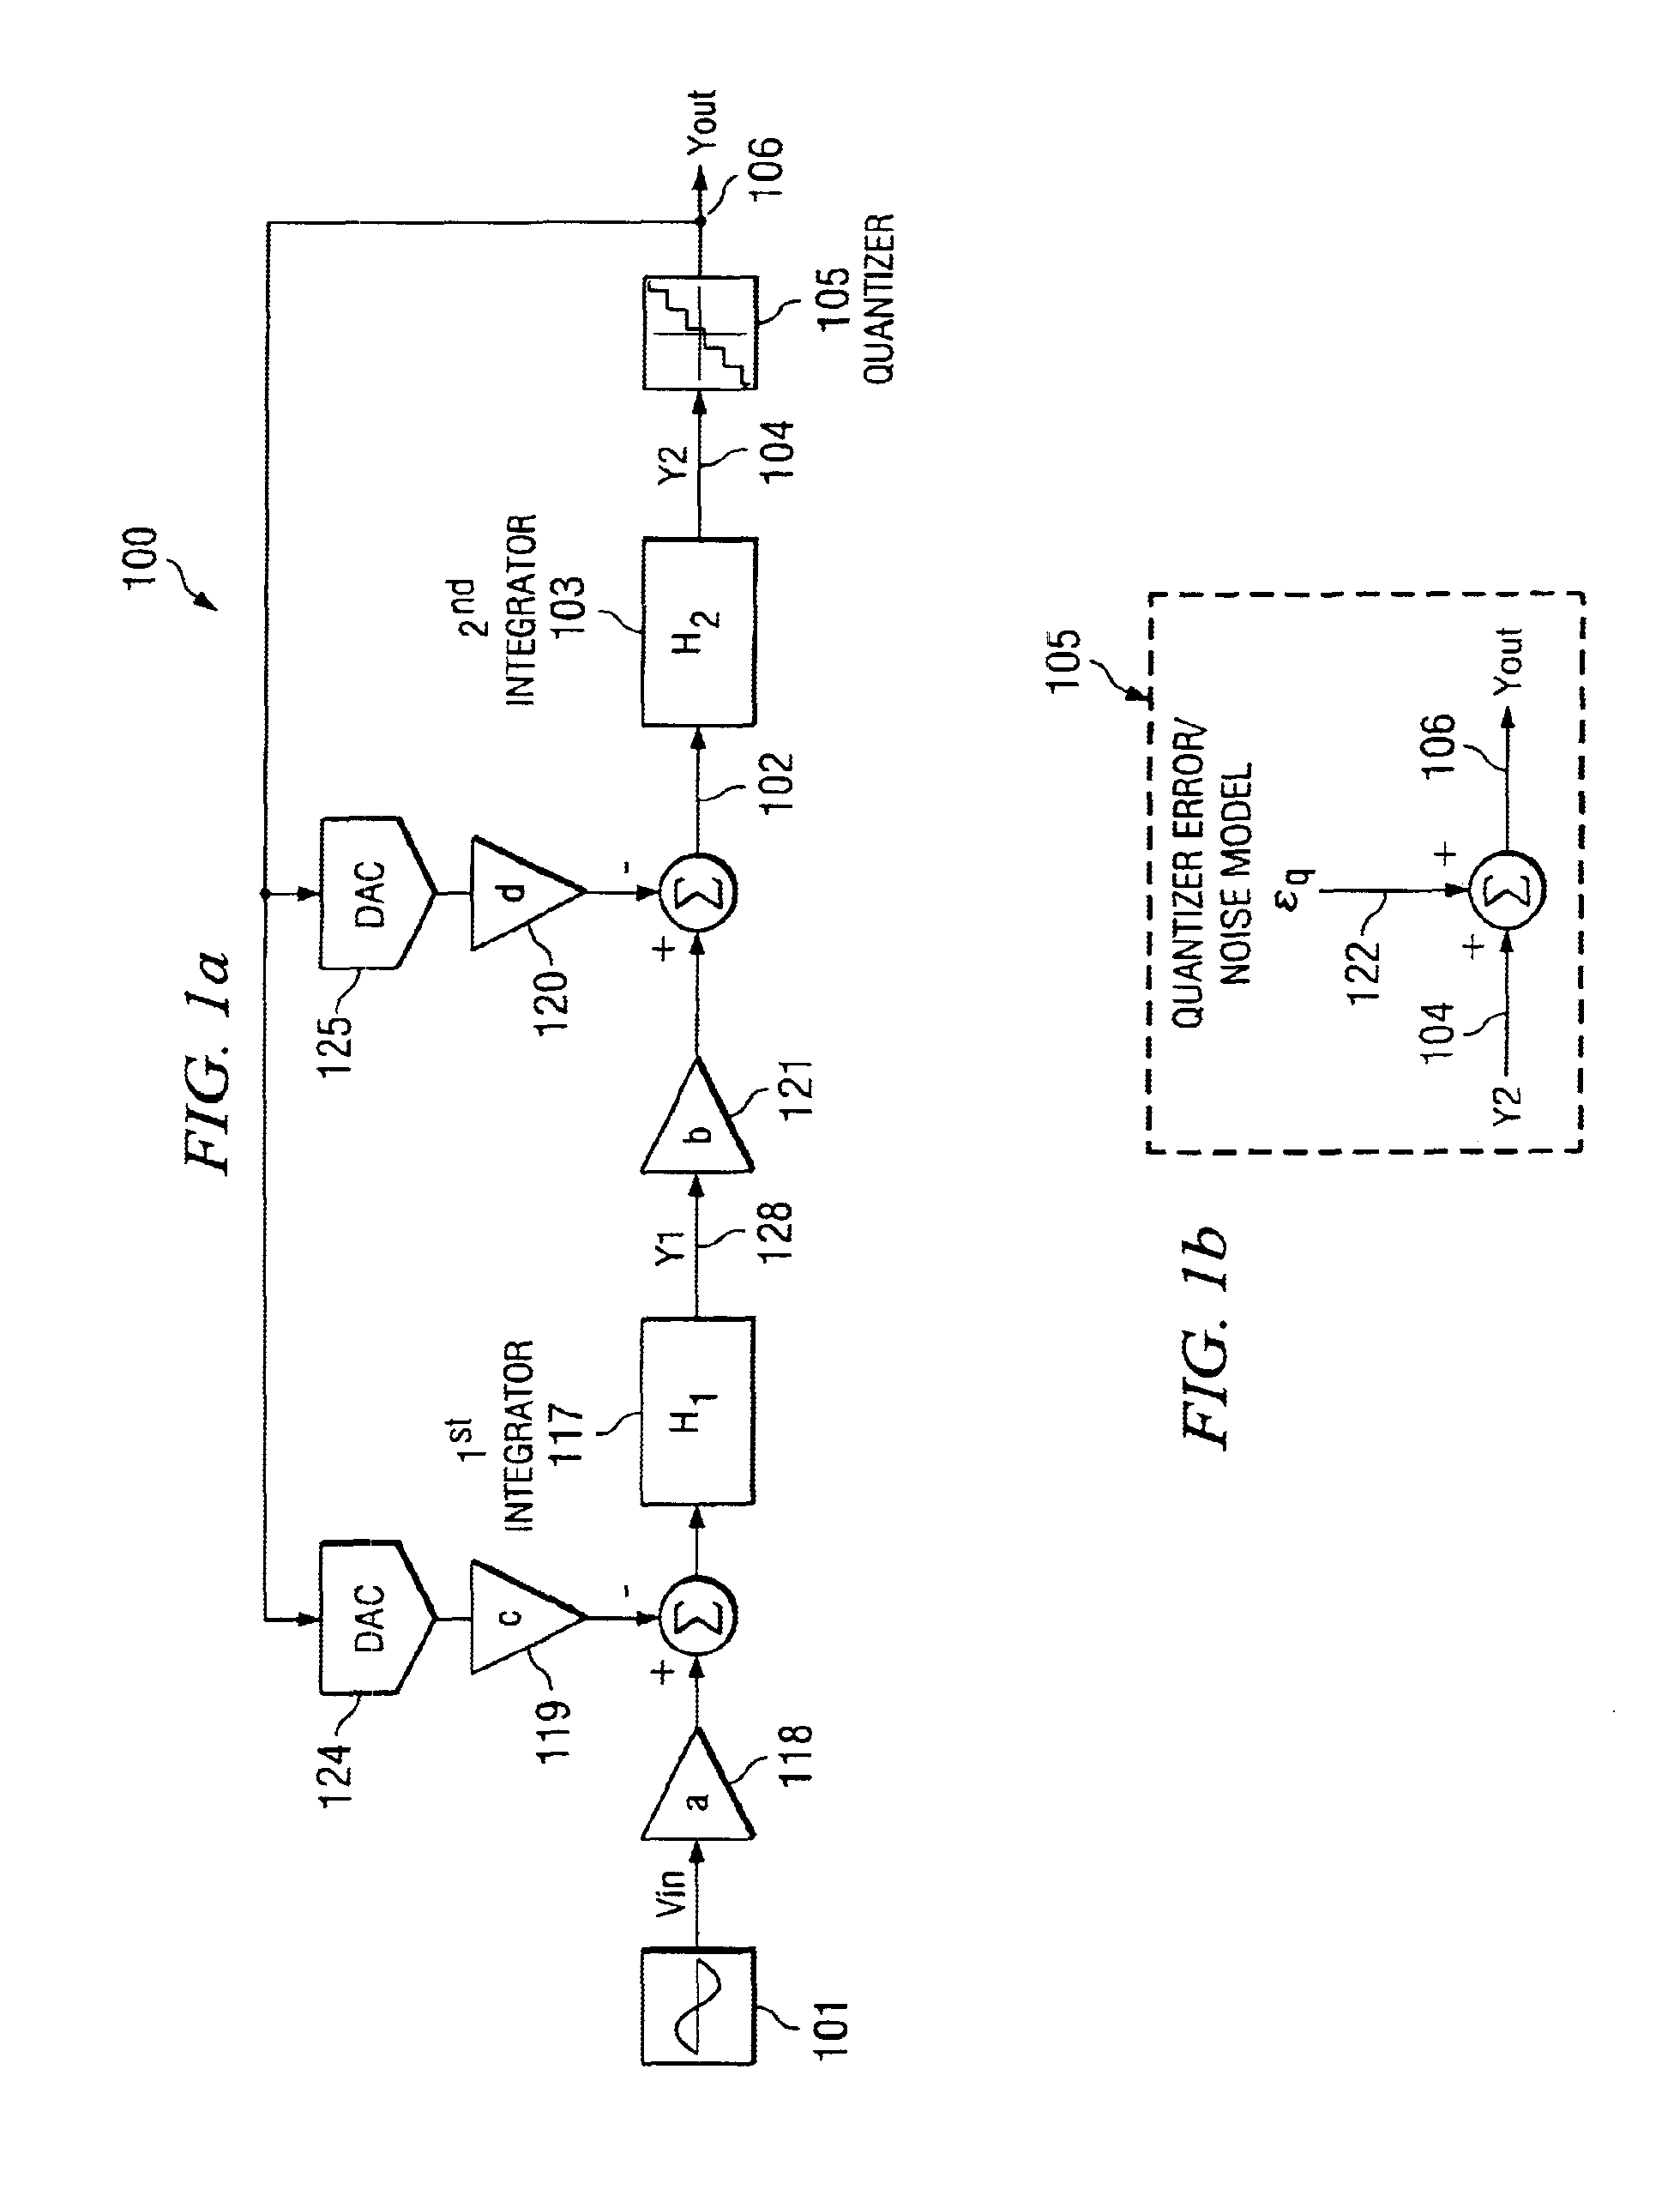 Method and circuit for reducing quantizer input/output swing in a sigma-delta modulator